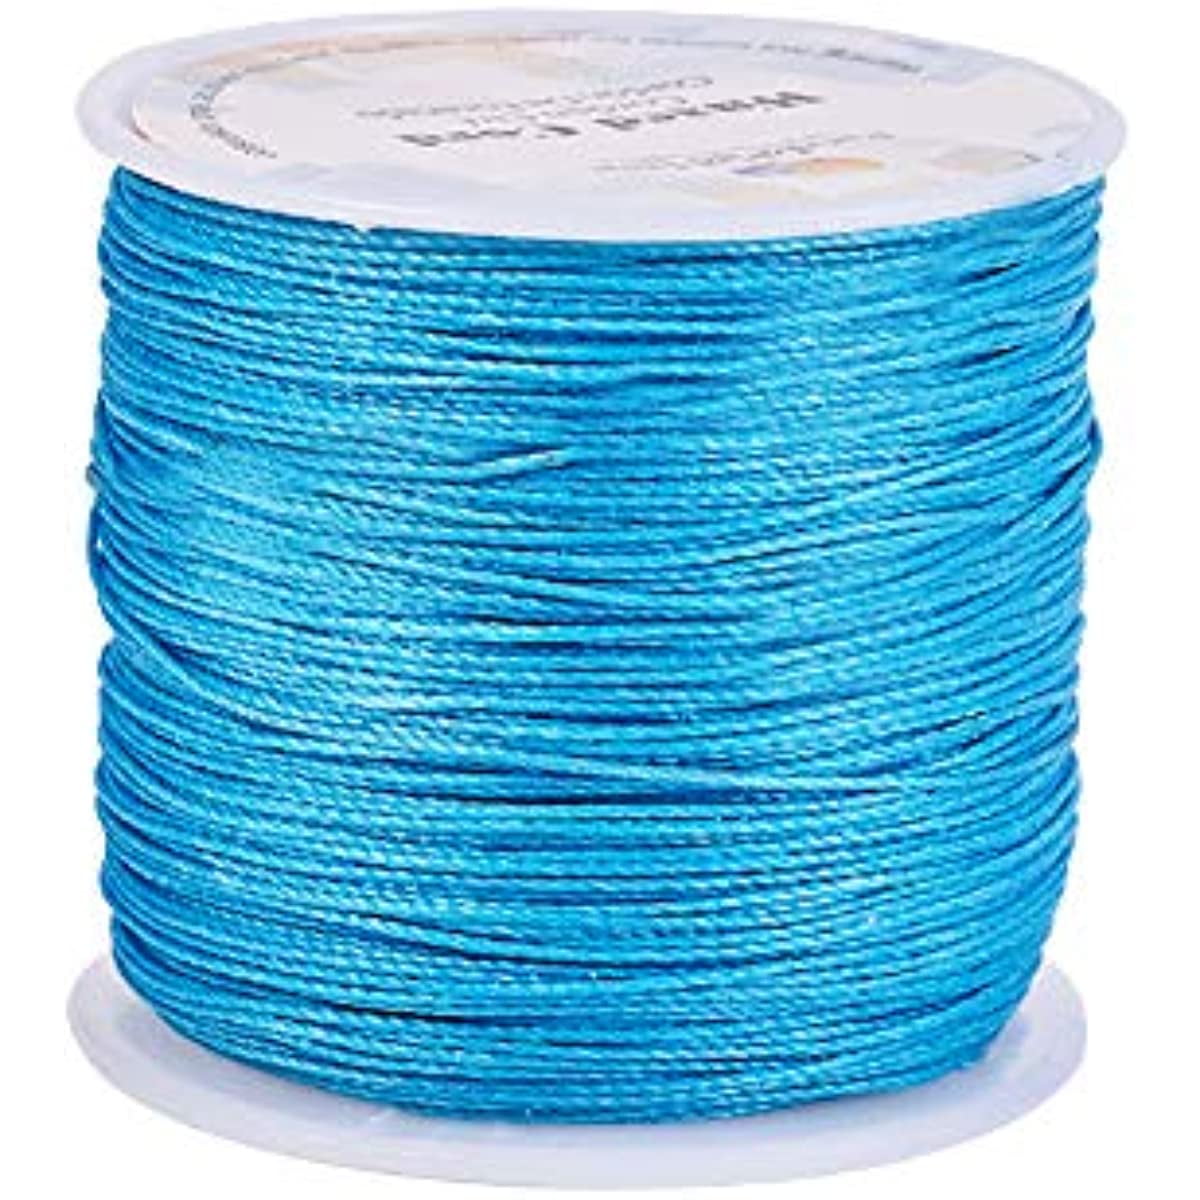 PH PandaHall 1mm Waxed Cord, 400 Yards Waxed Cotton Cord Earth Tone Waxed  Thread Beading String Waxed Craft String for Bracelet Necklace Jewelry  Waist